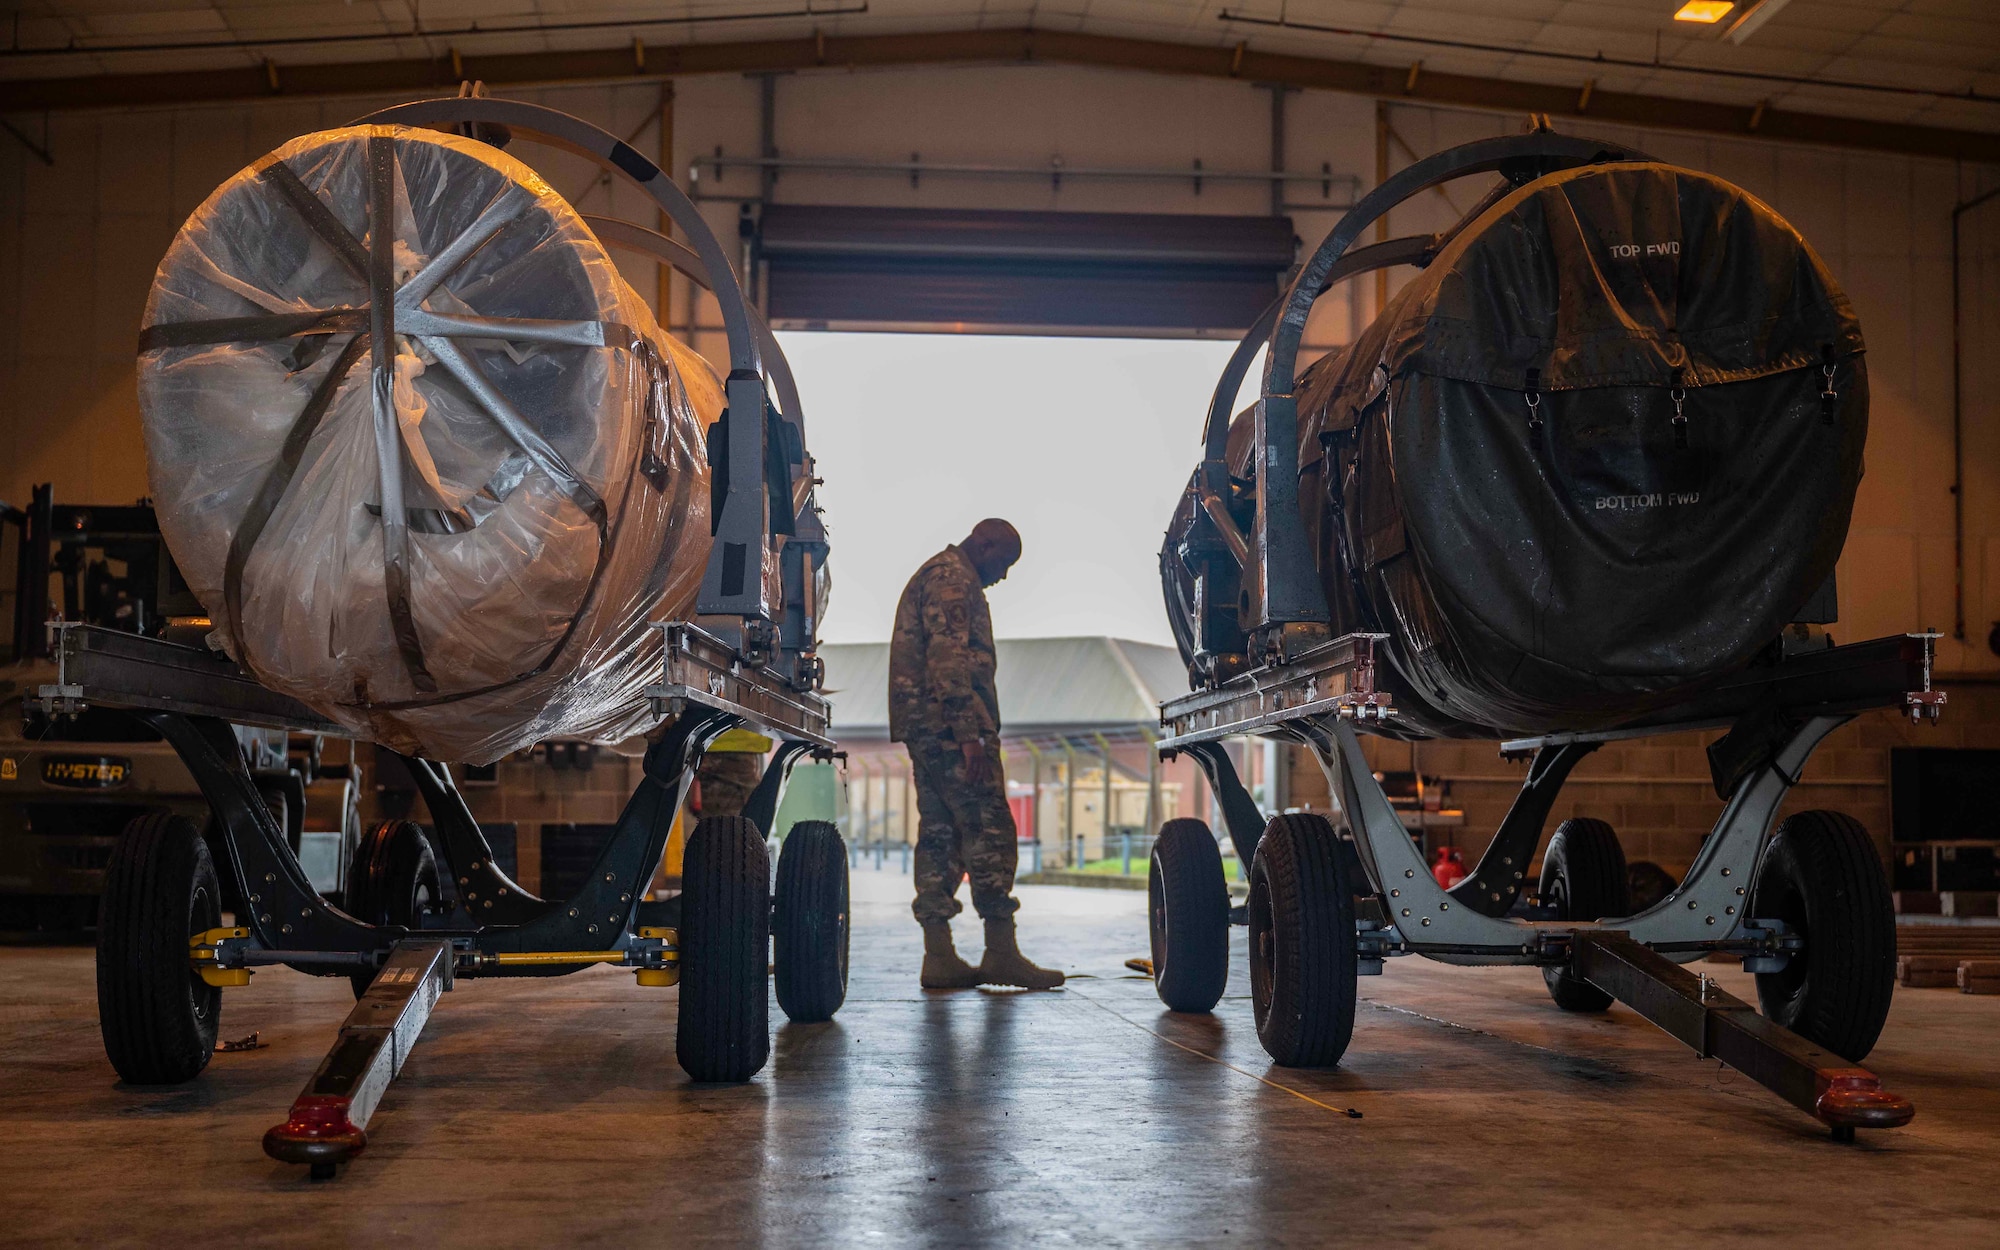 U.S. Air Force Tech. Sgt. Edwin Long, 727th Air Mobility Squadron Air Transportation Function distribution craftsman, inspects mobility cargo from the 480th Fighter Generation Squadron, Spangdahlem Air Base, at Royal Air Force Mildenhall, England, Oct. 3, 2023. RAF Mildenhall AMS and Spangdahlem AFB FGS combat readiness personnel conducted a joint inspection before redeploying the engines by protecting USAF assets, personnel, and maintaining a ready force. (U.S. Air Force photo by Senior Airman Viviam Chiu)